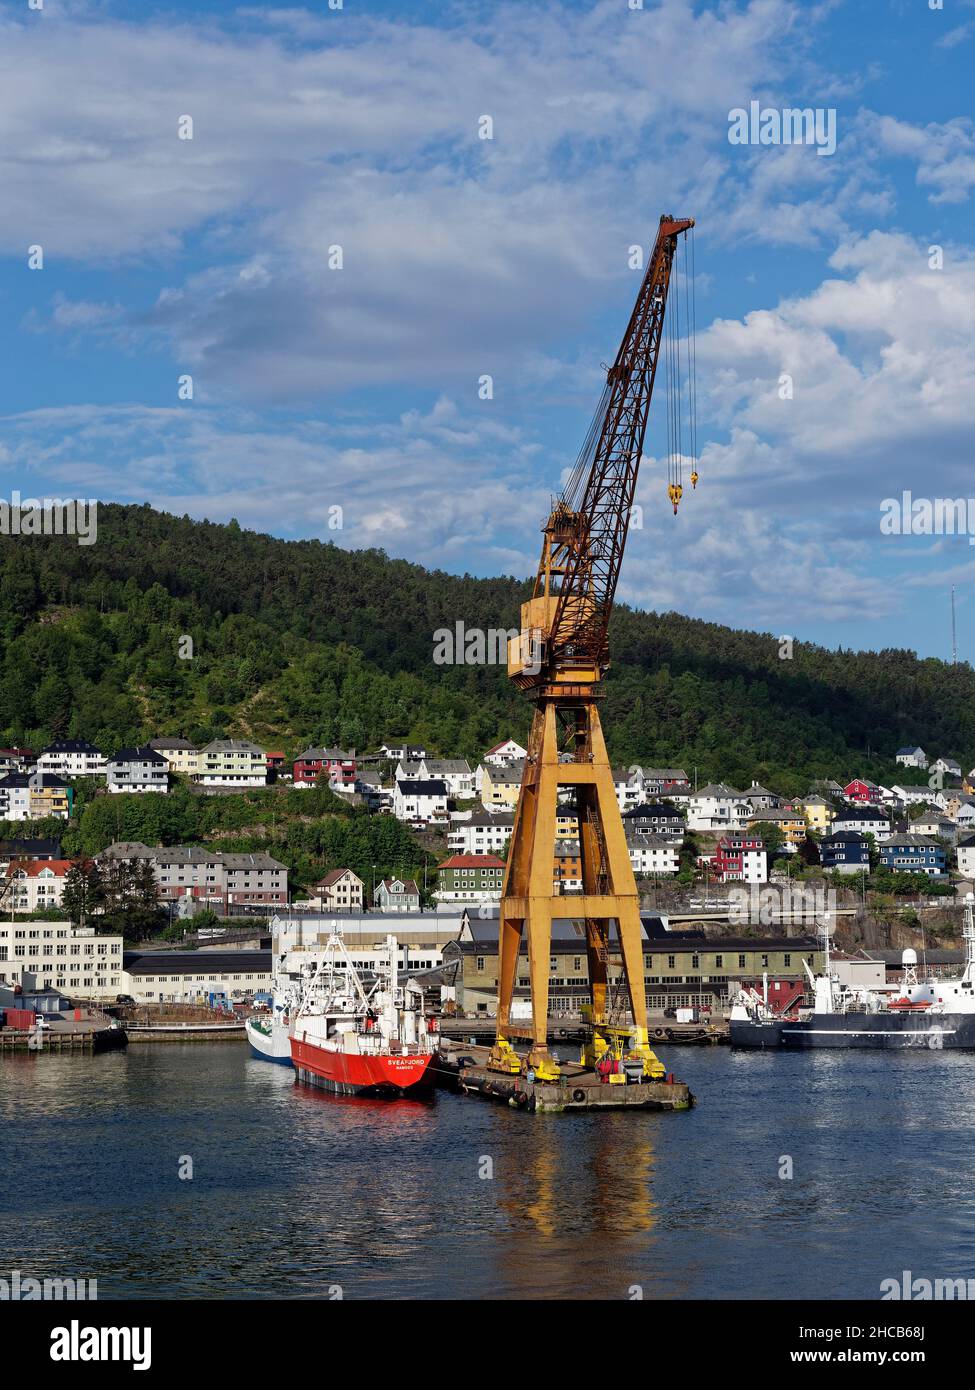 Fishing Vessels moored beside a large Yellow Shore Crane at the Fishing Port in Bergen, with traditional stone warehousing in the background. Stock Photo